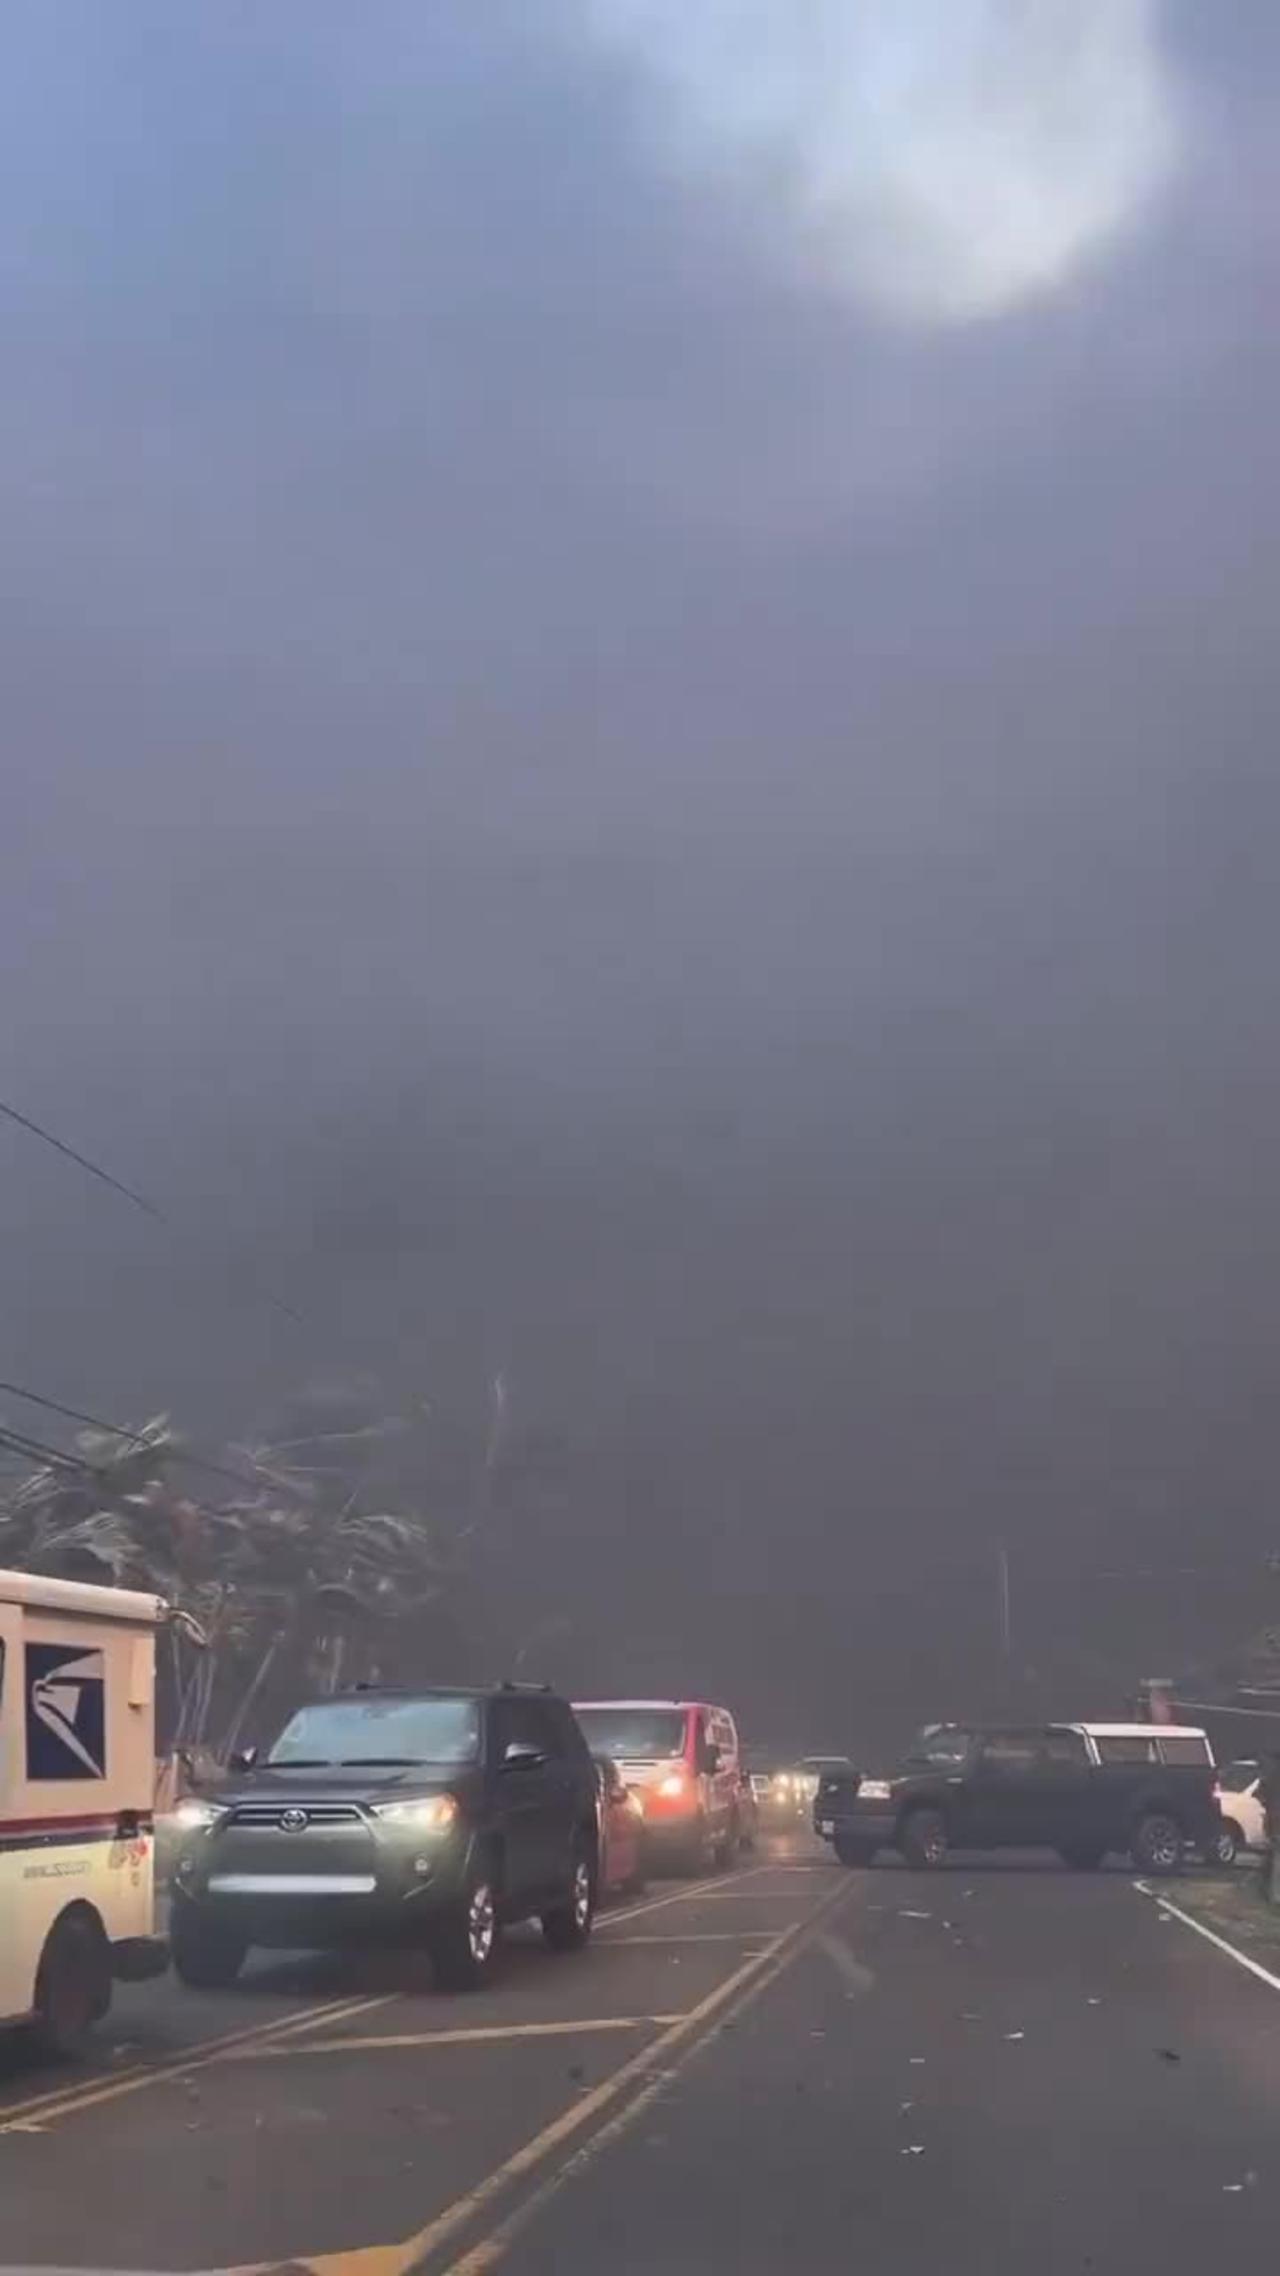 🤯Check out these incredible Hurricane Force Winds in #LahainaFires